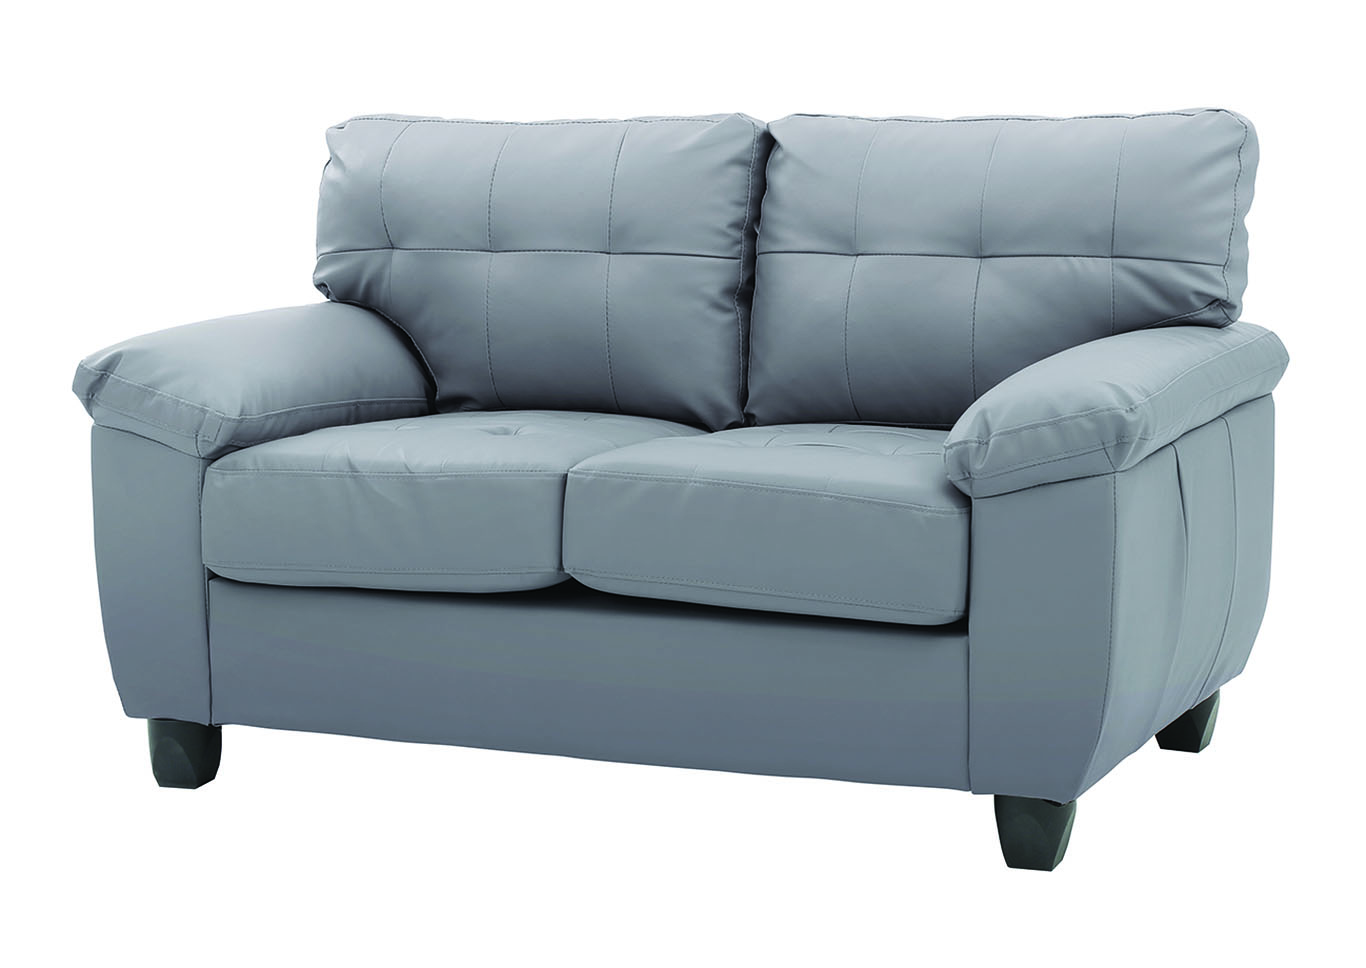 Gray Faux Leather Loveseat,Glory Furniture